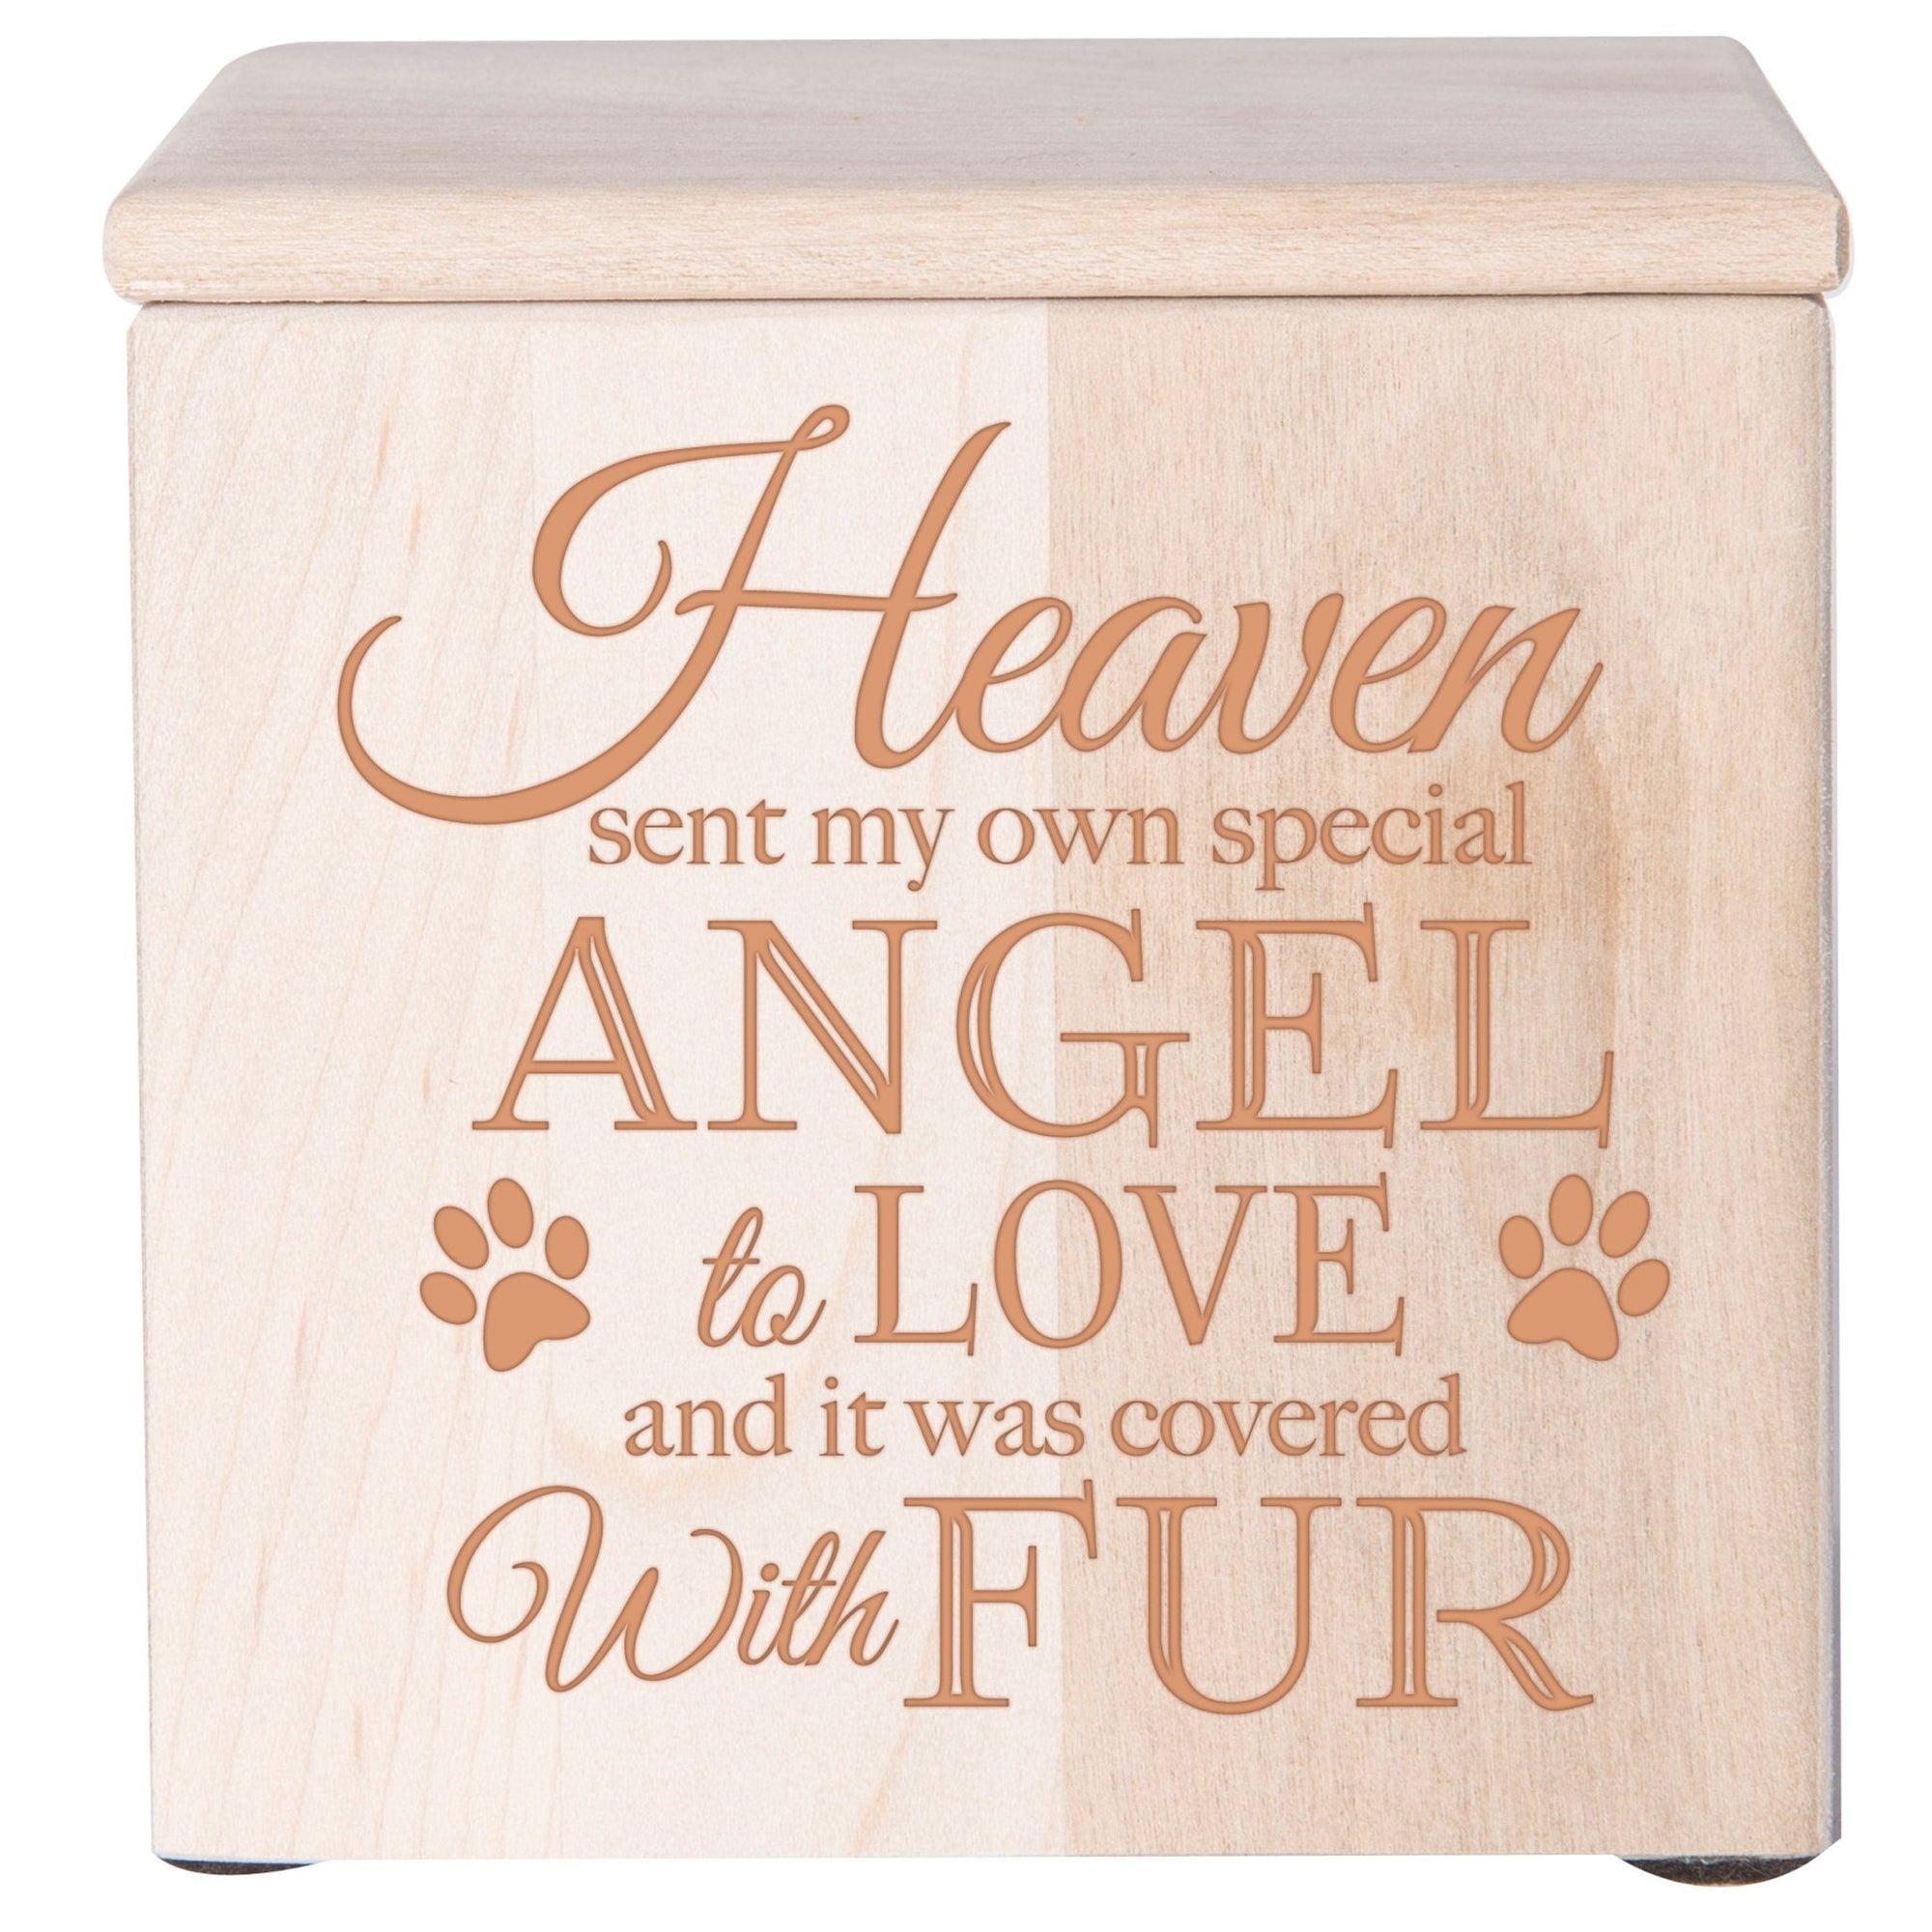 Pet Memorial Keepsake Cremation Urn Box for Dog or Cat - Heaven Sent My Own Special Angel - LifeSong Milestones